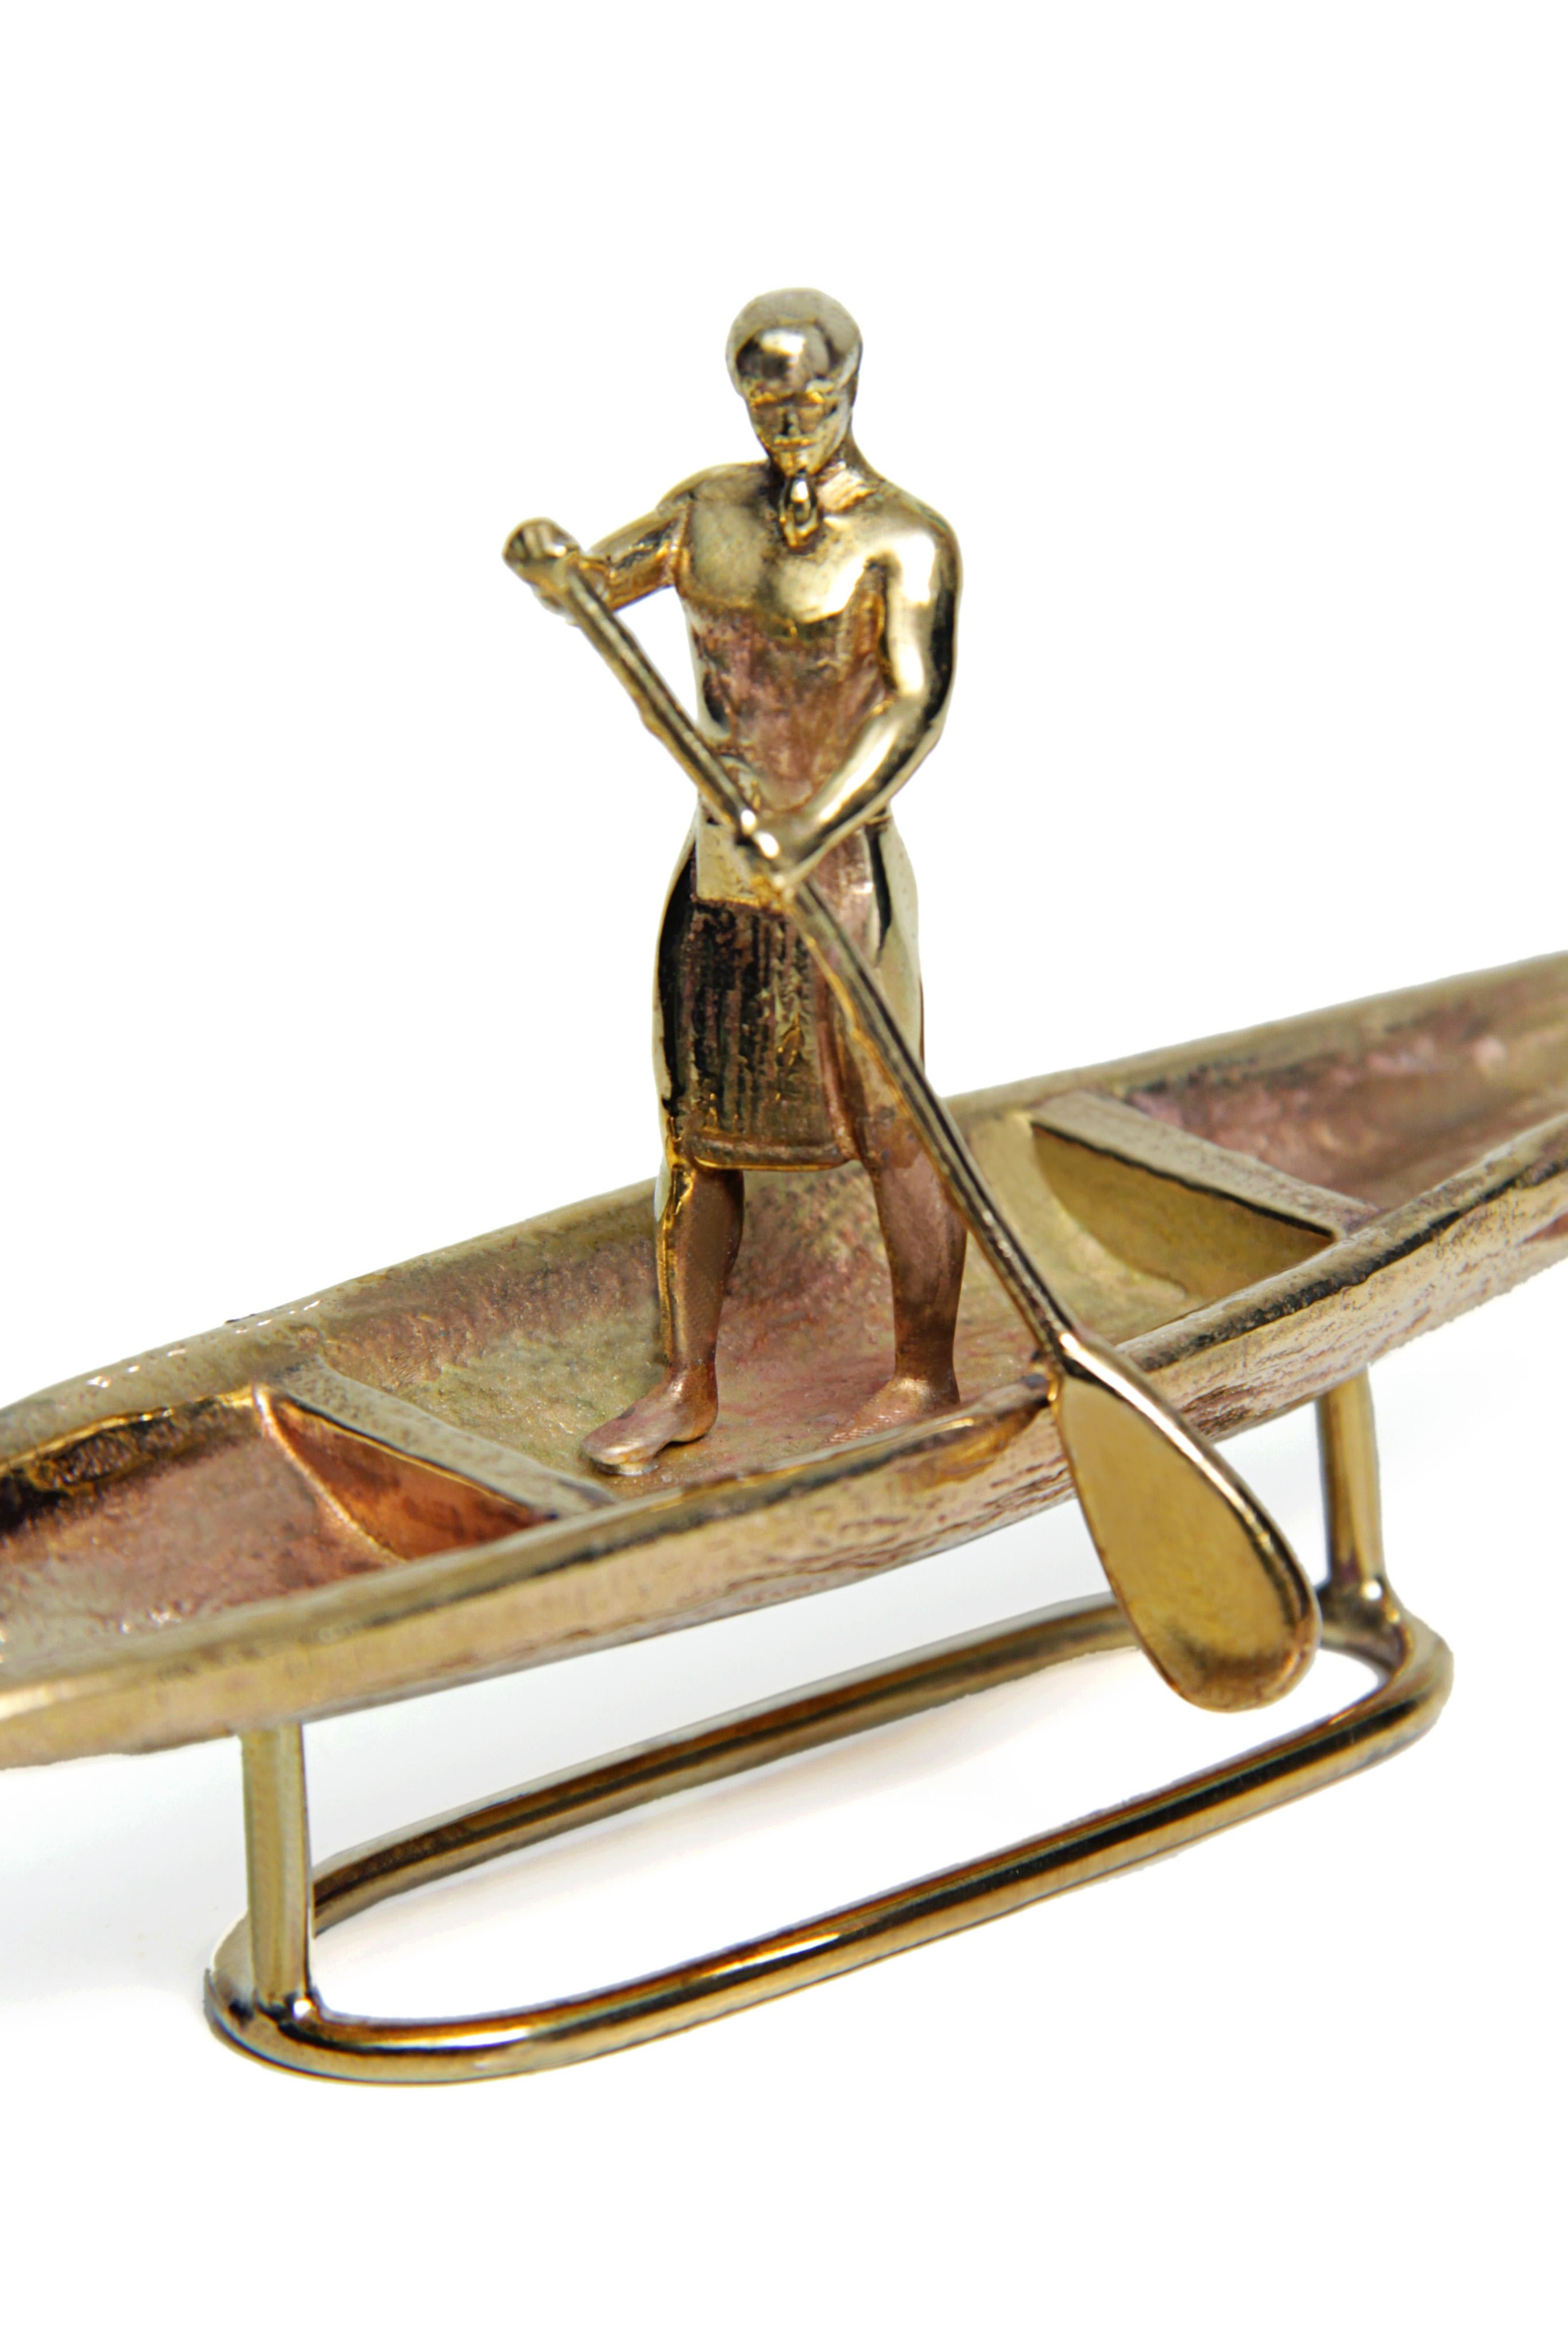 This polished brass sculpture of a man in a wooden canoe is a representation of the peaceful and timeless experience of living by the Amazon River, coming and going. Placing him on any surface will turn it into a stream of river where you can just